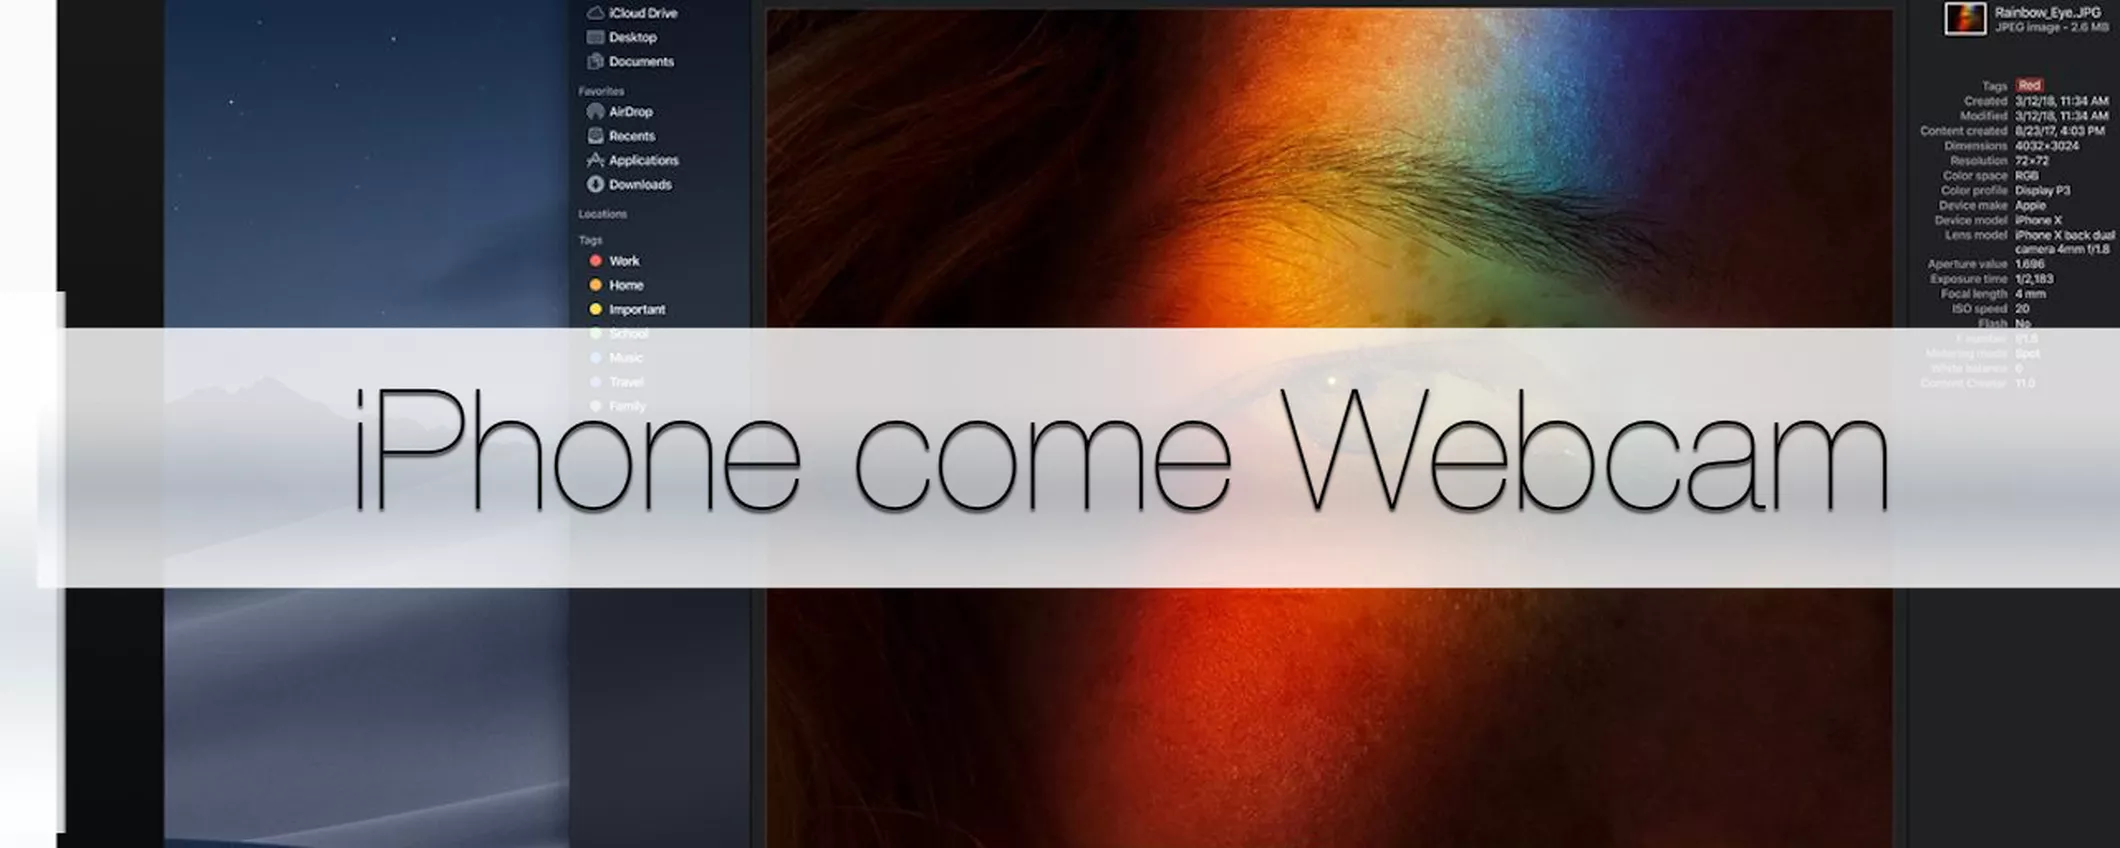 Usare iPhone come webcam grazie a Continuity in macOS Mojave